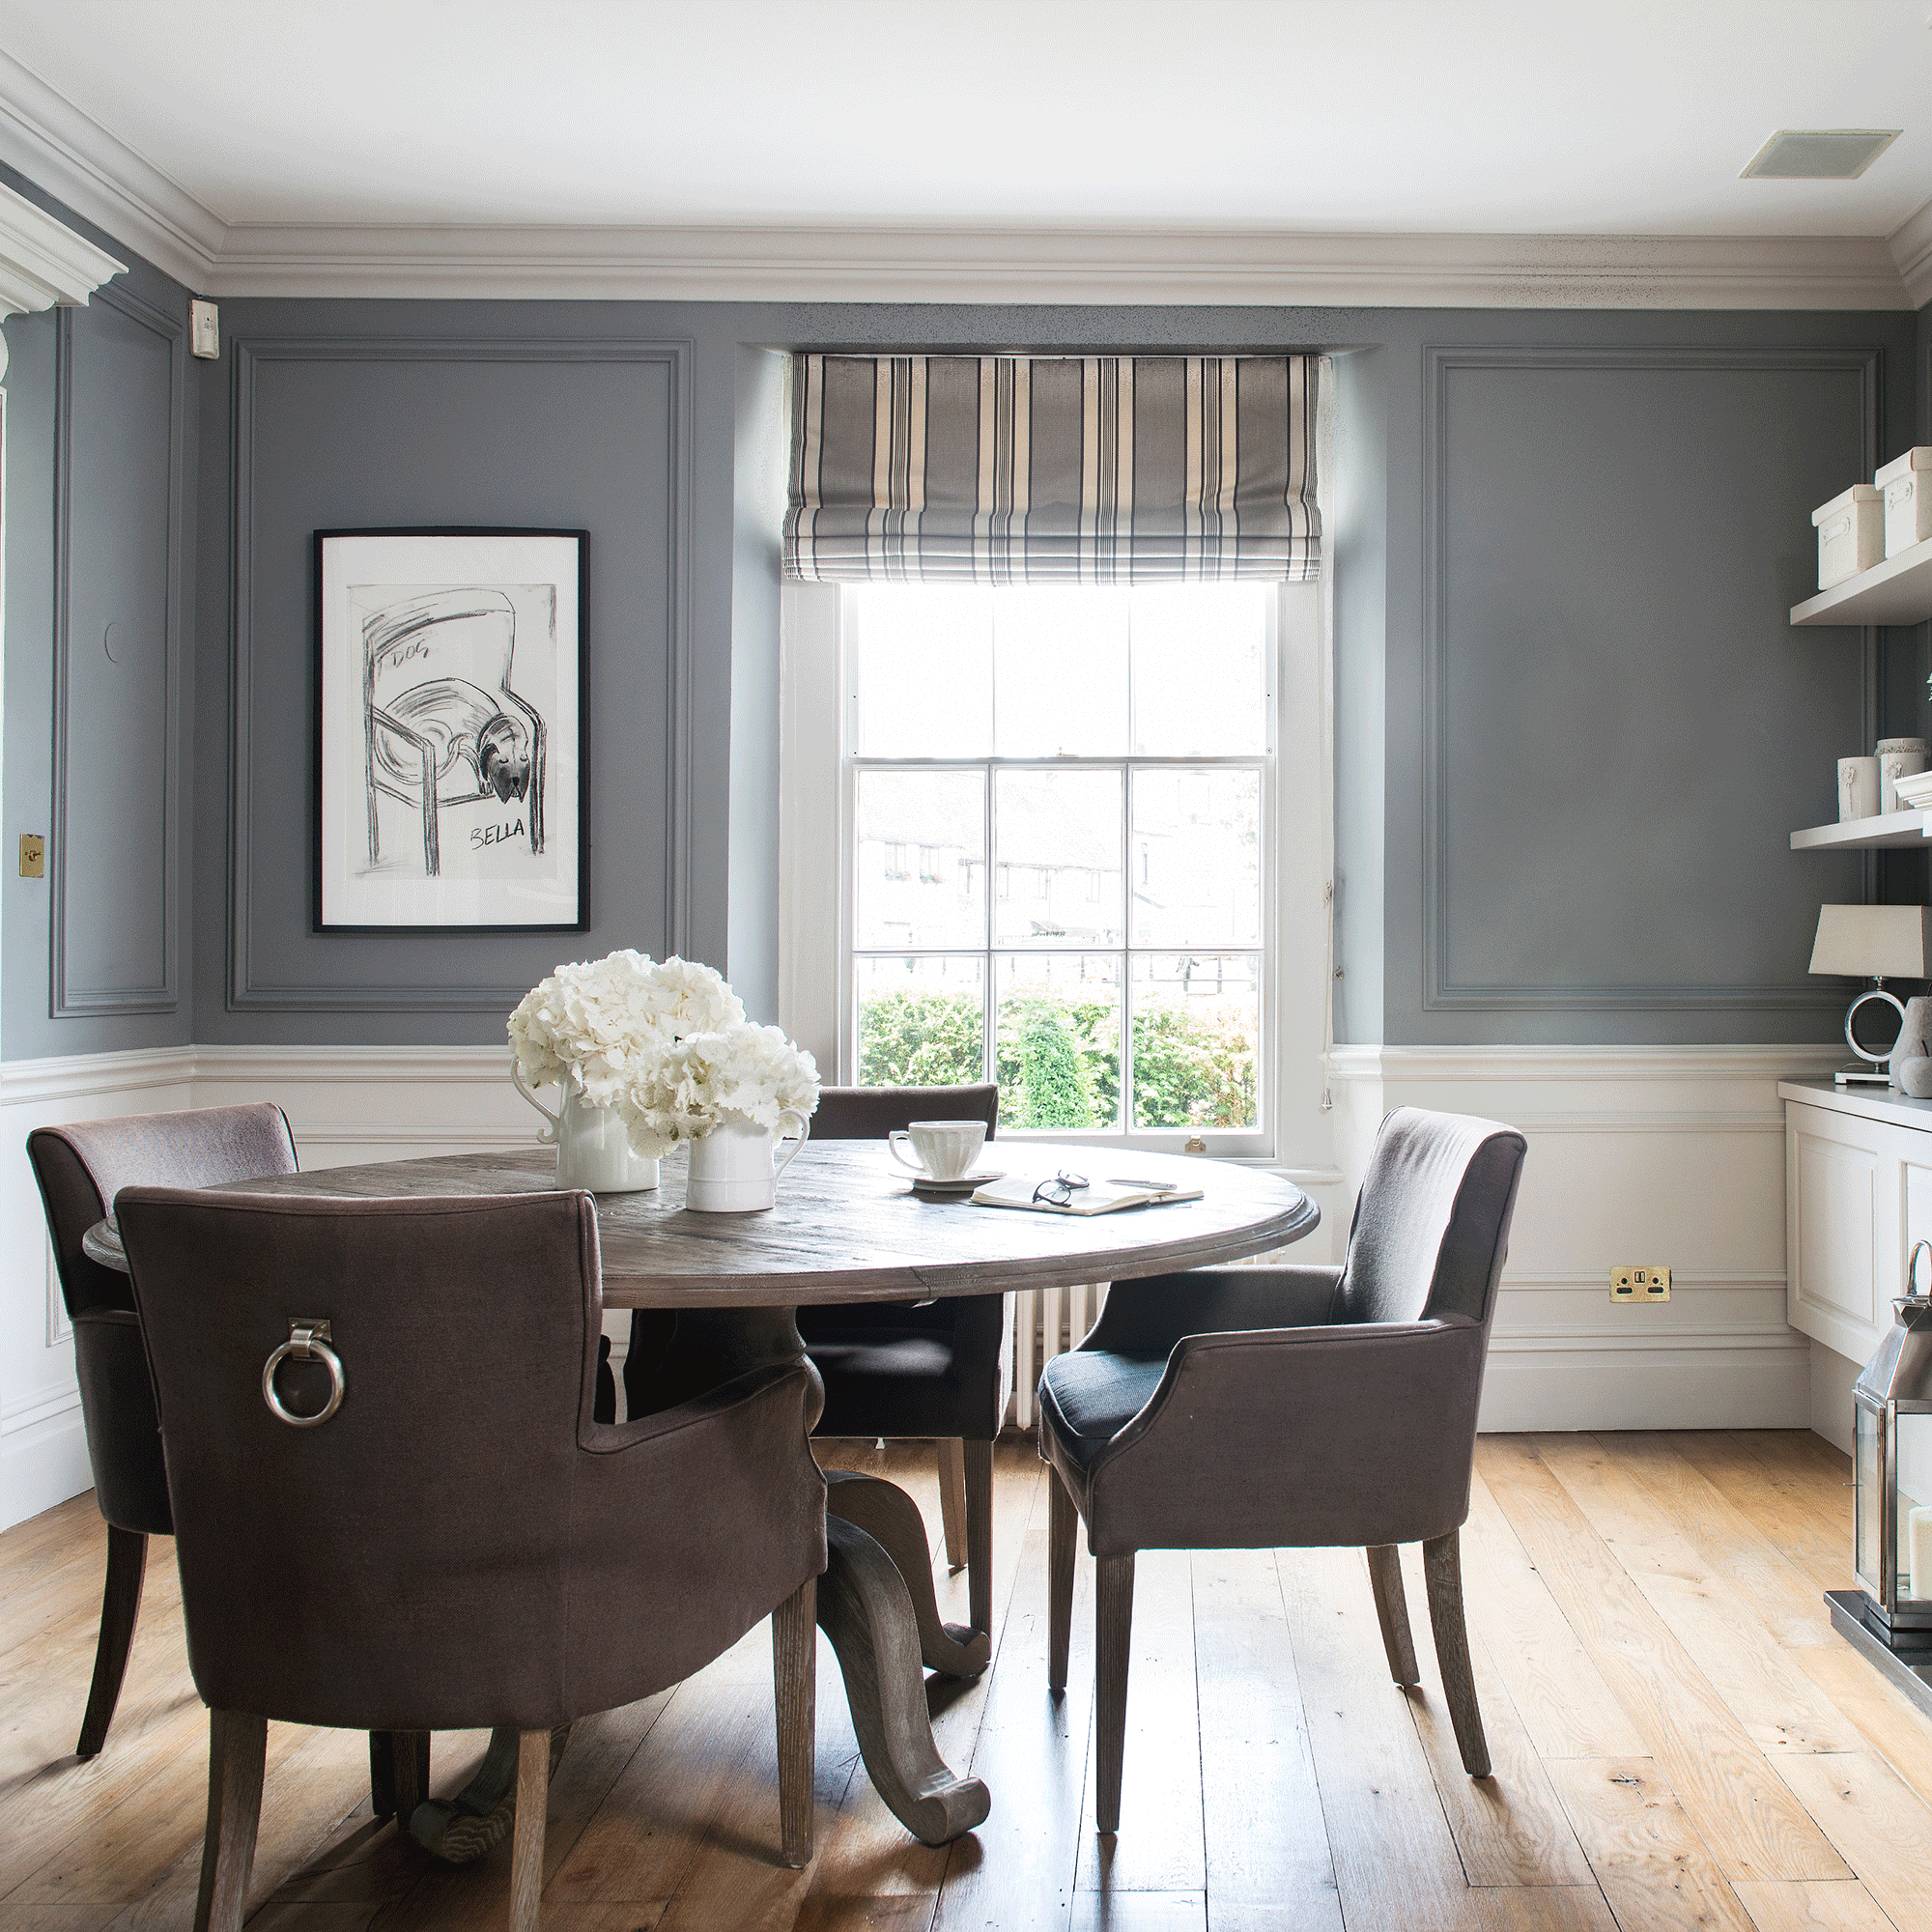 Grey dining room ideas – 30 stylish ways to use this classic shade in your home